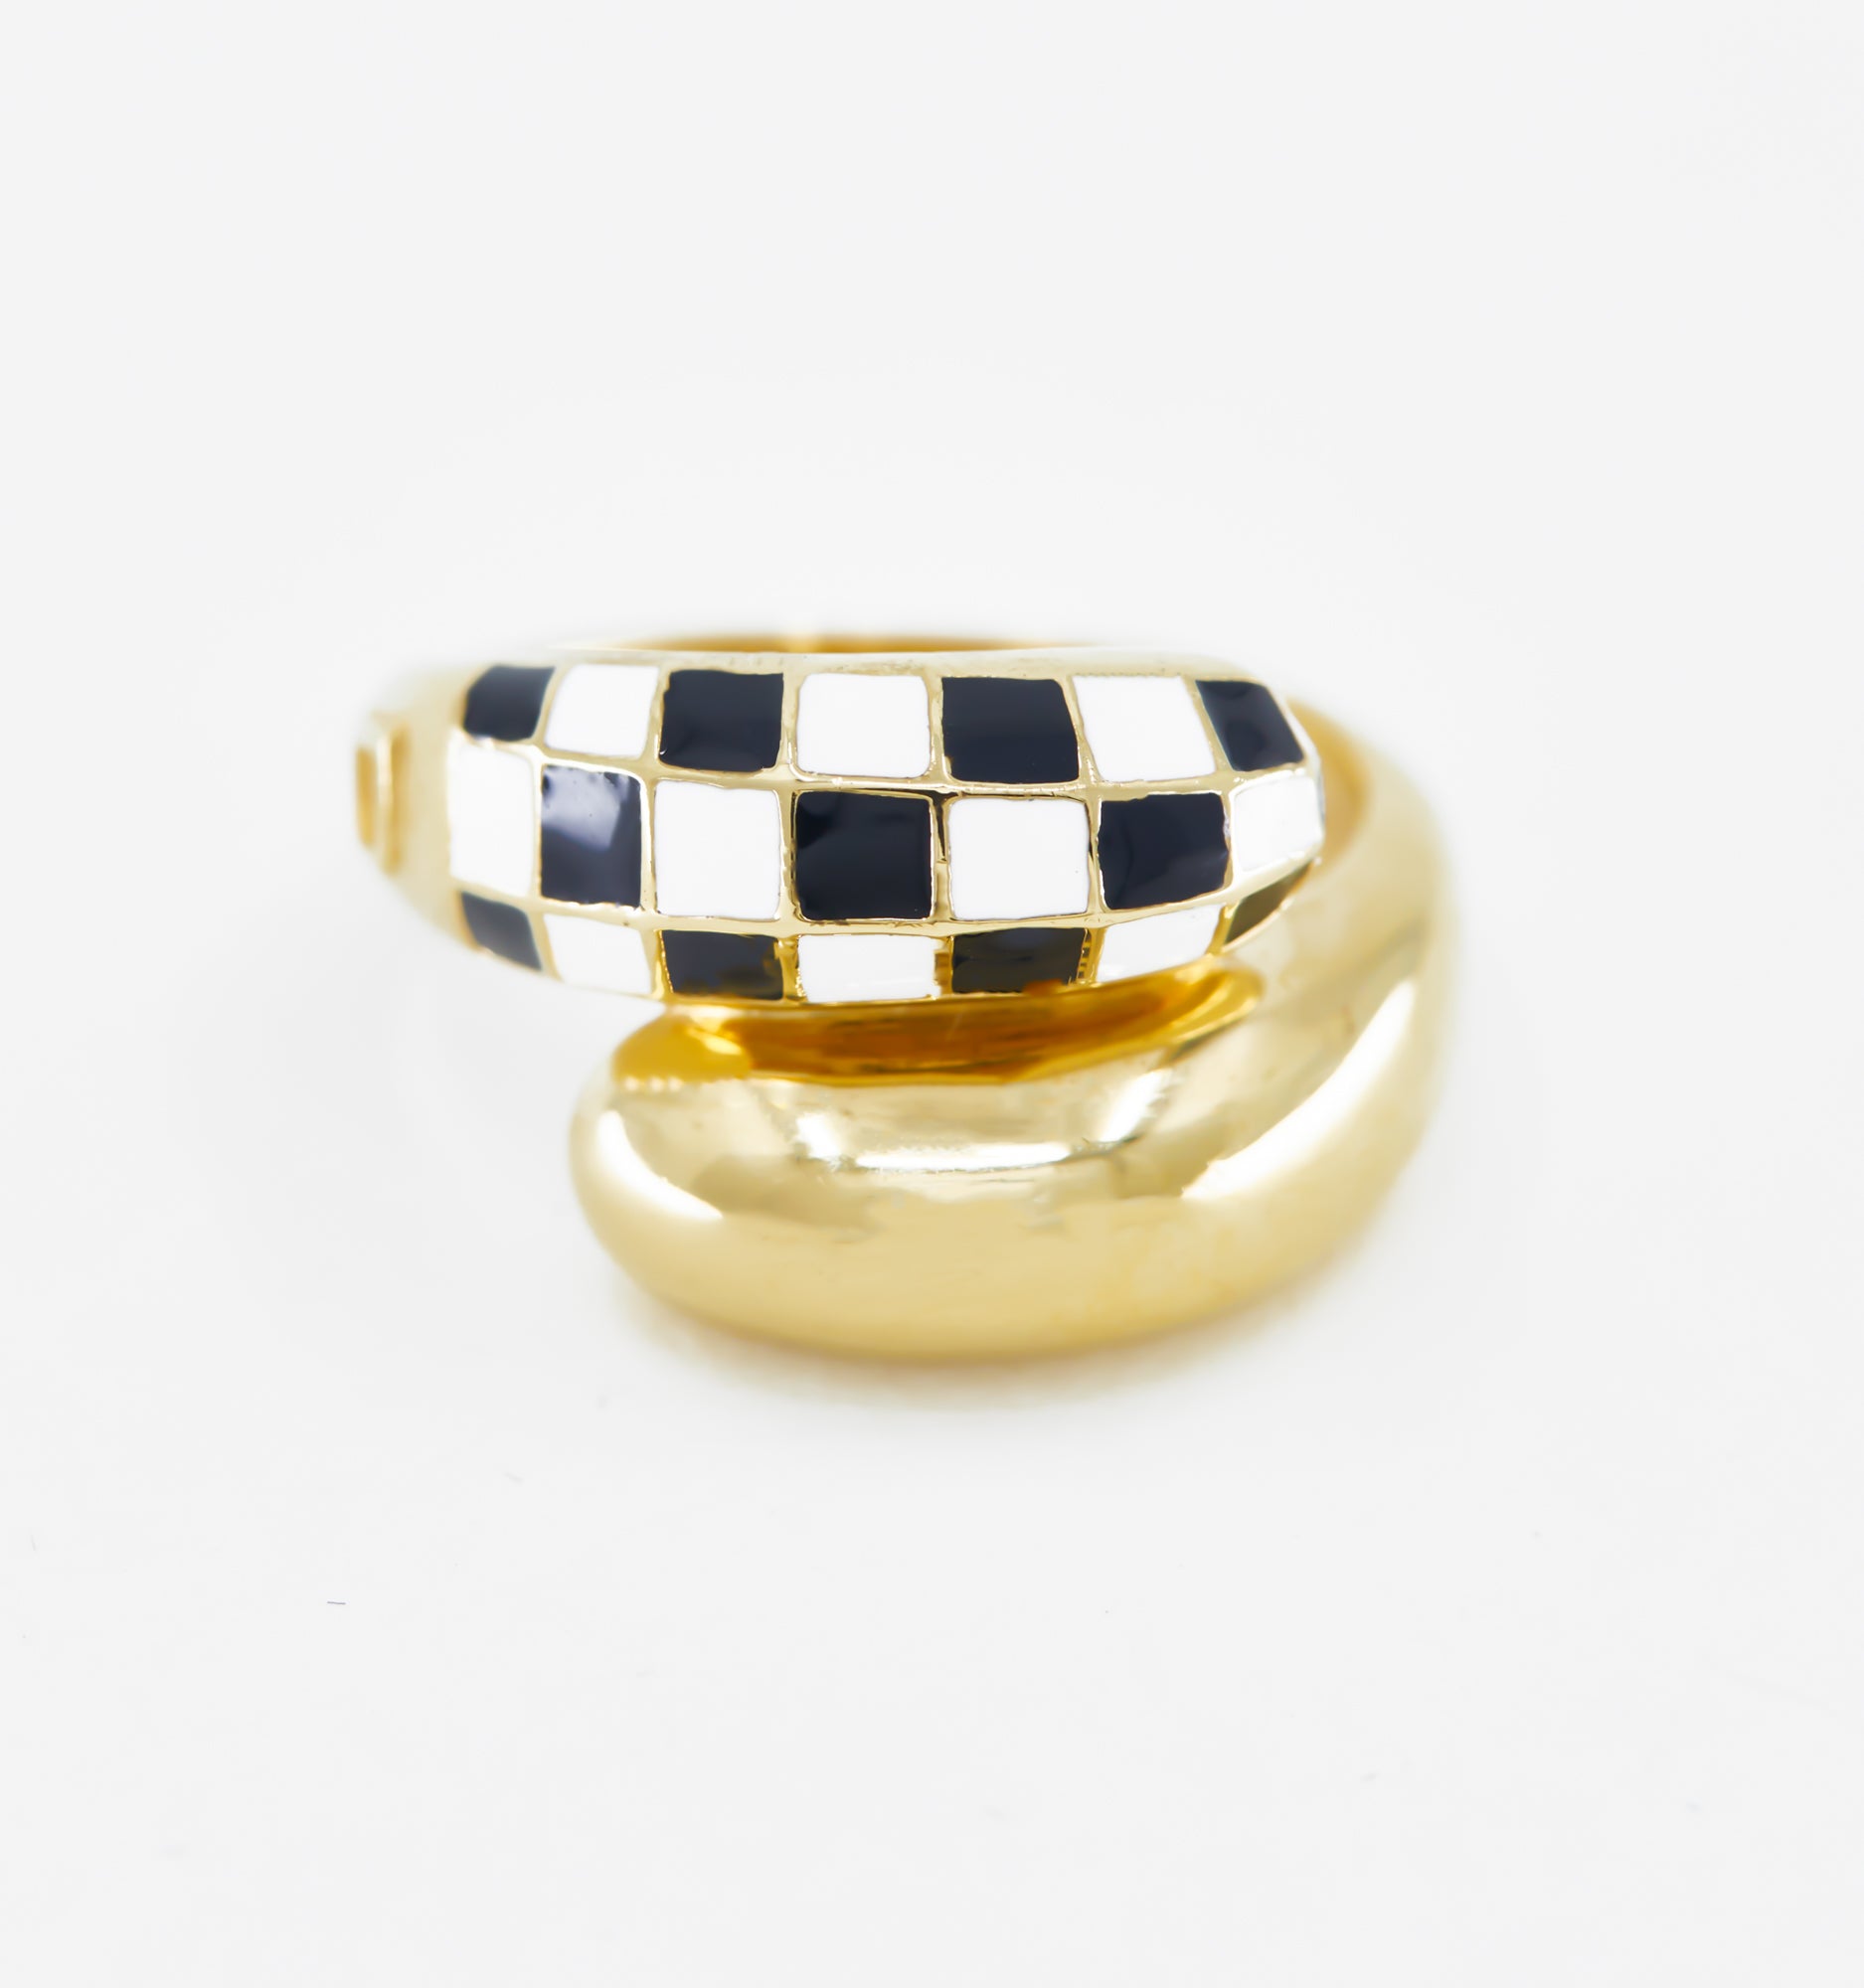 Wrap Checker Ring - Black And White